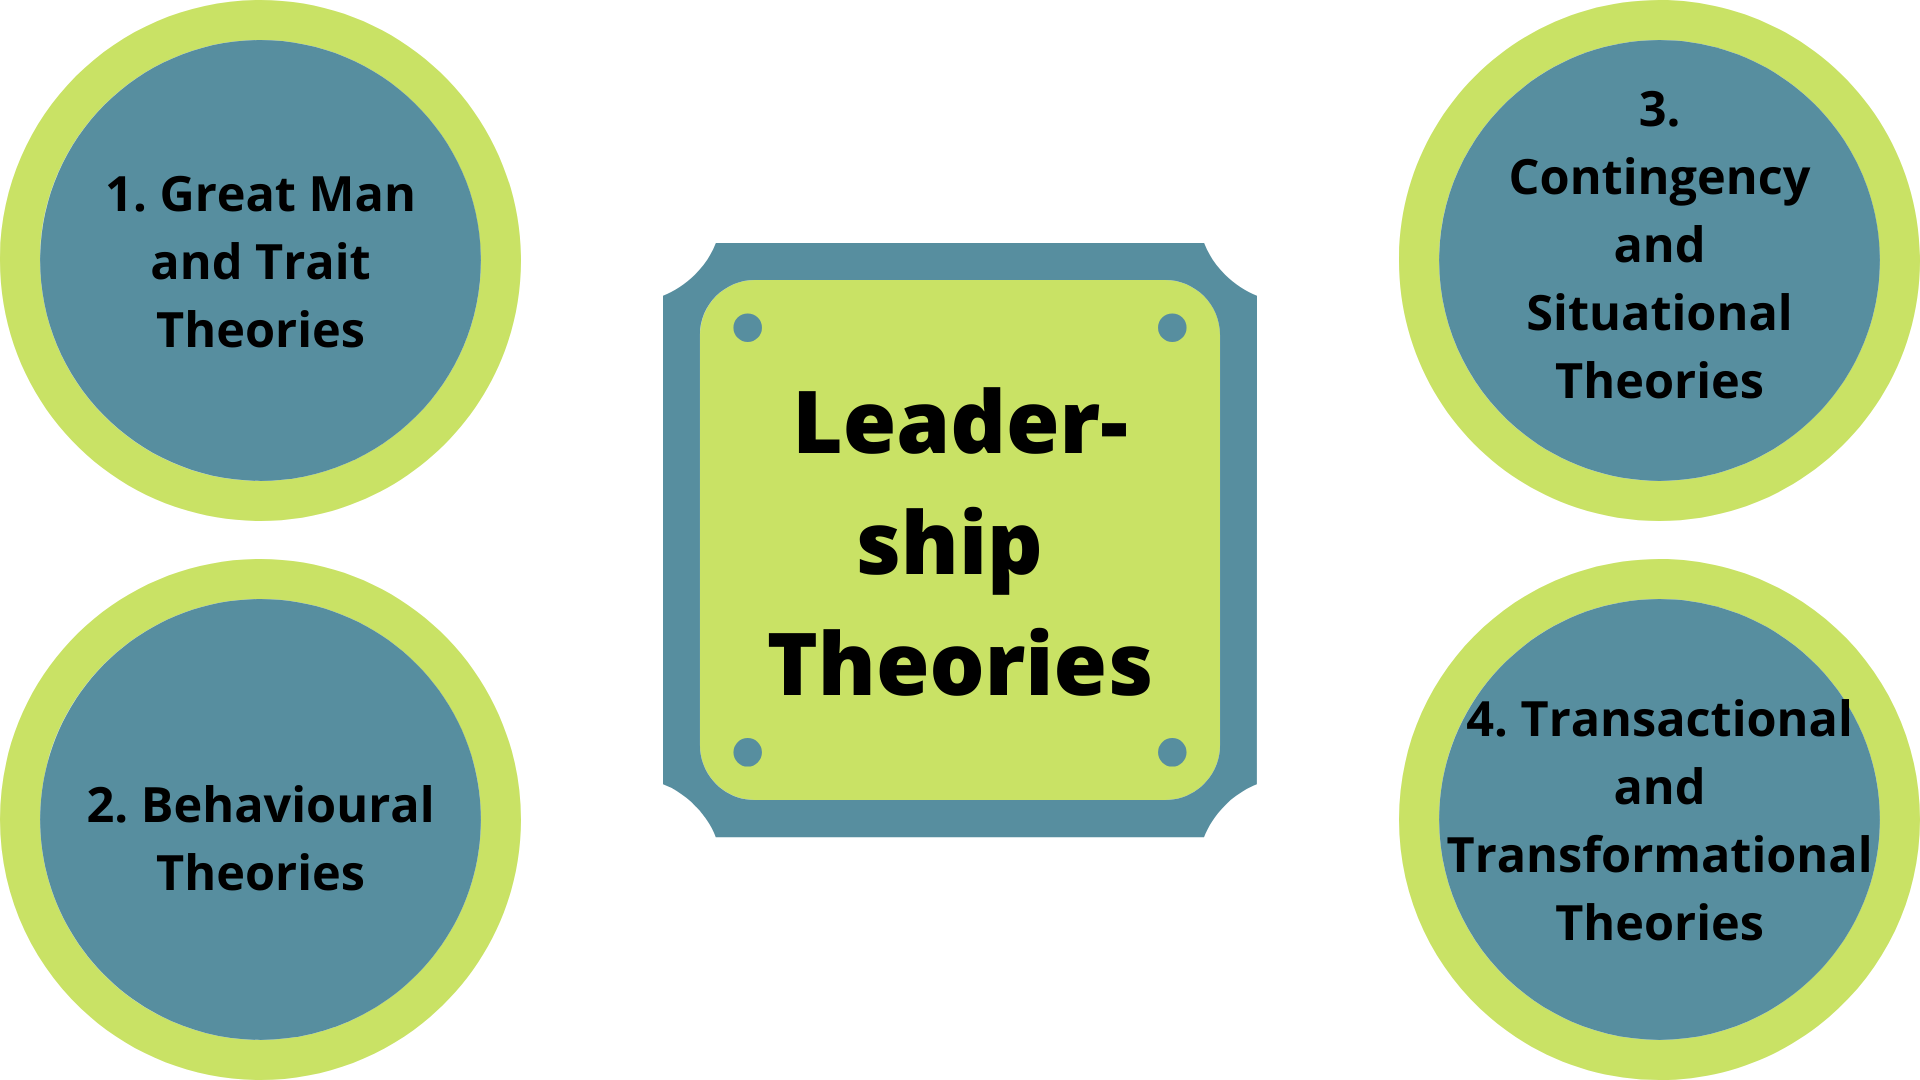 leadership theories assignment